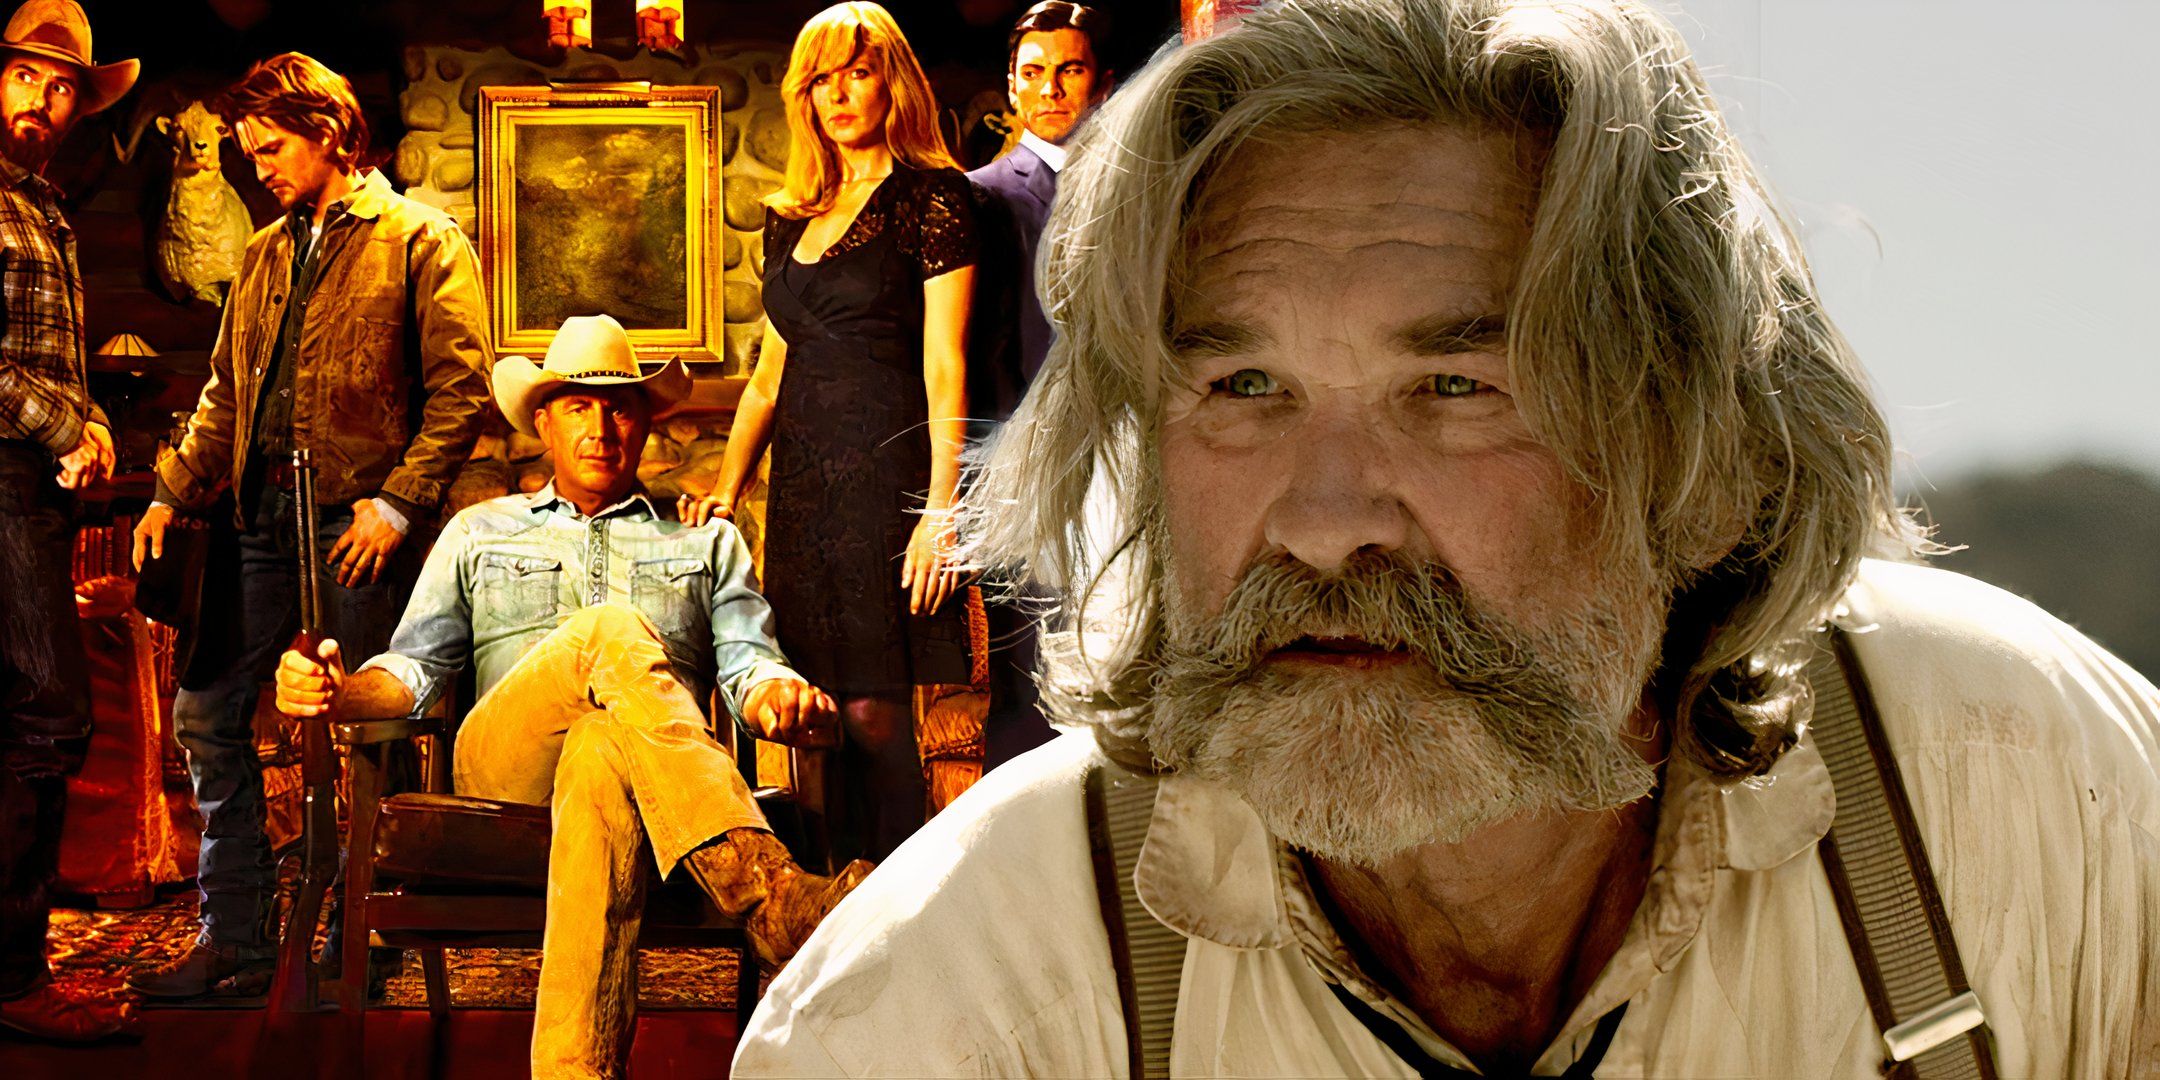 Kurt Russell from Bone Tomahawk looking at the Yellowstone cast in custom image